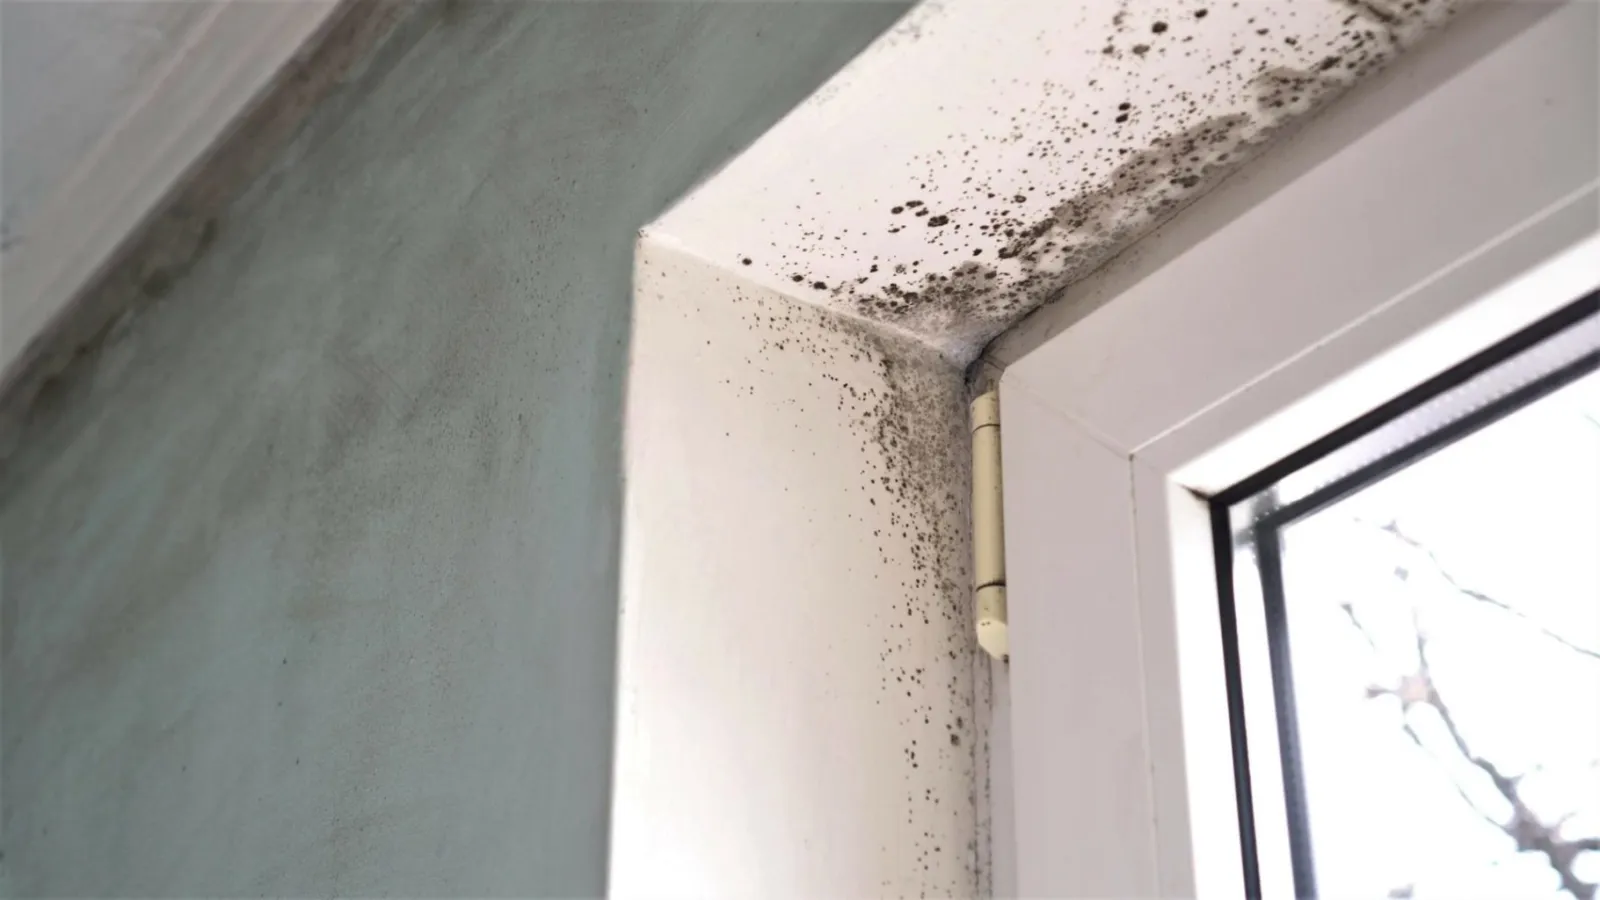 How HVAC Systems Lower Your Home’s Humidity and Mold Risk